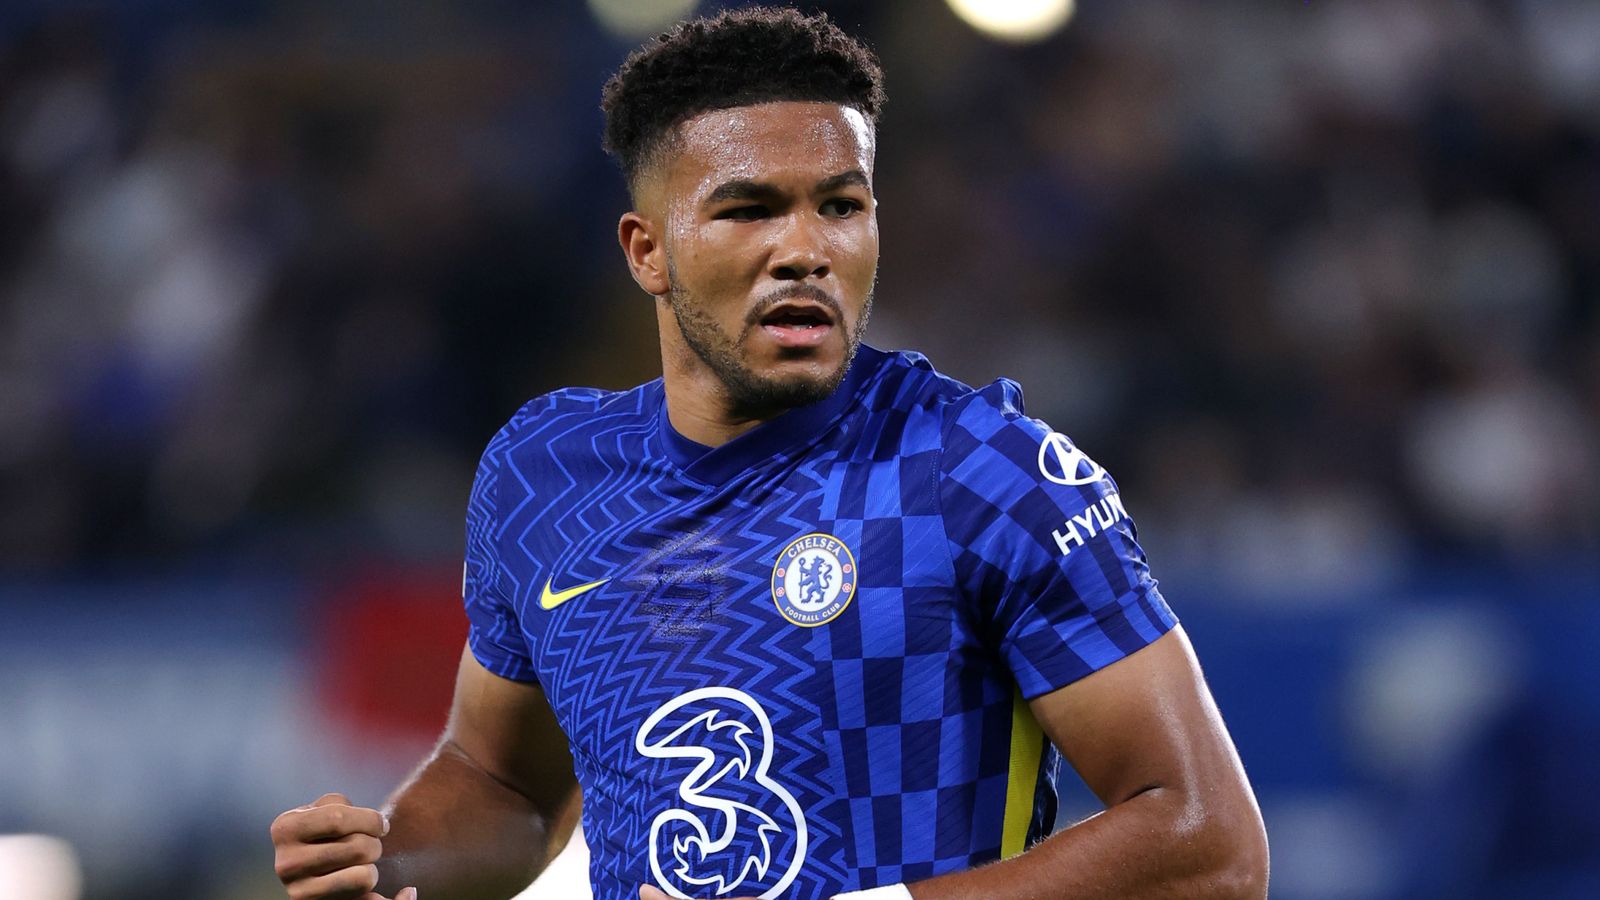 Reece James has Champions League and Euro 2020 medals stolen in burglary while playing for Chelsea vs Zenit